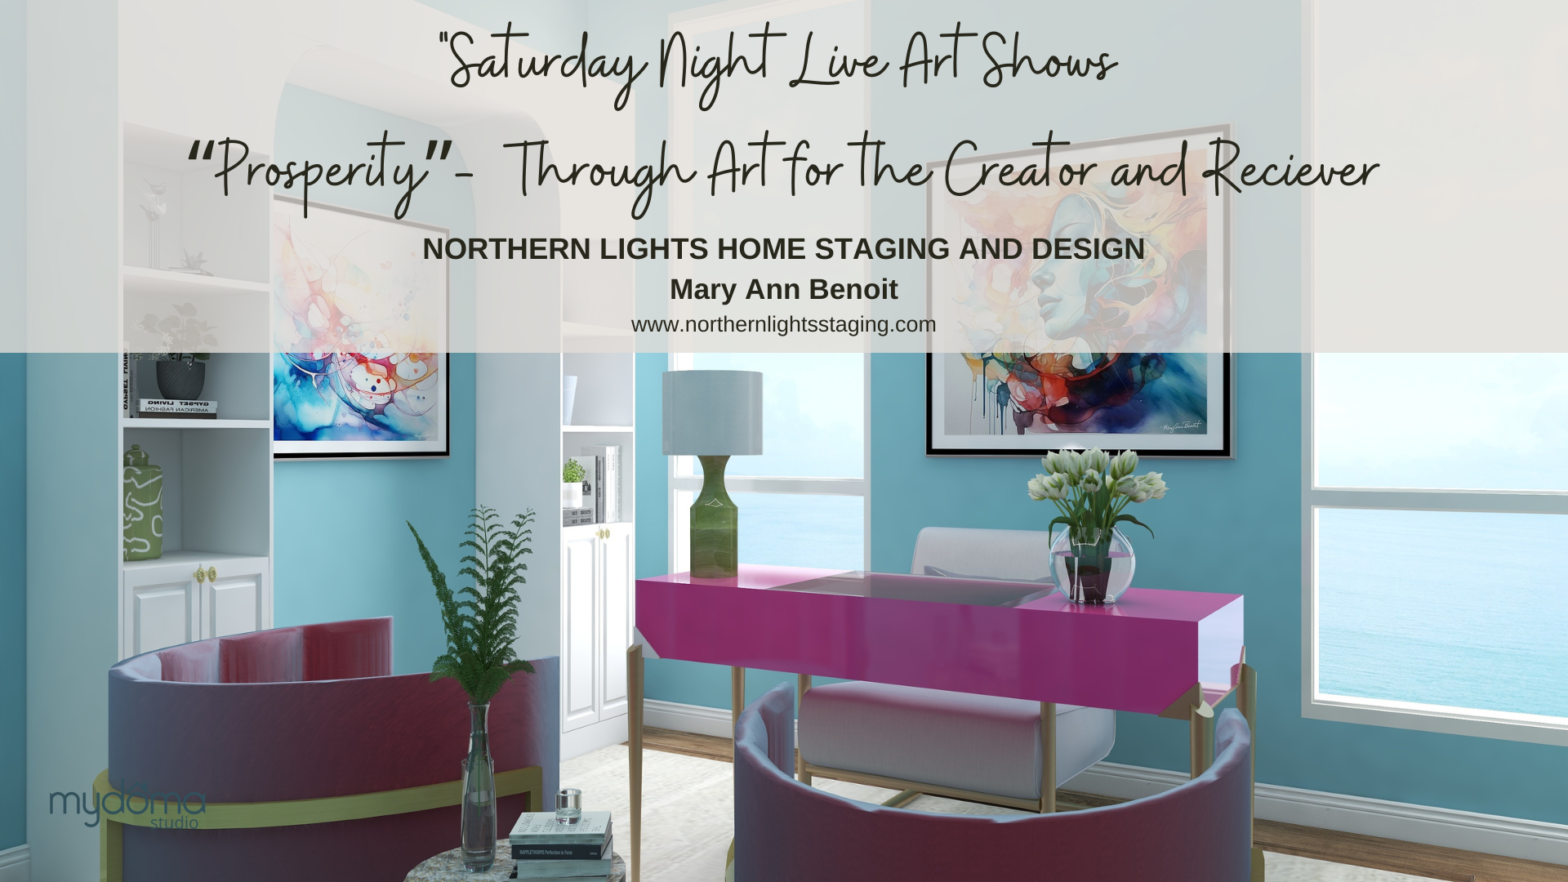 Saturday Night Live Art Shows- "Prosperity Energy Art and Edesign